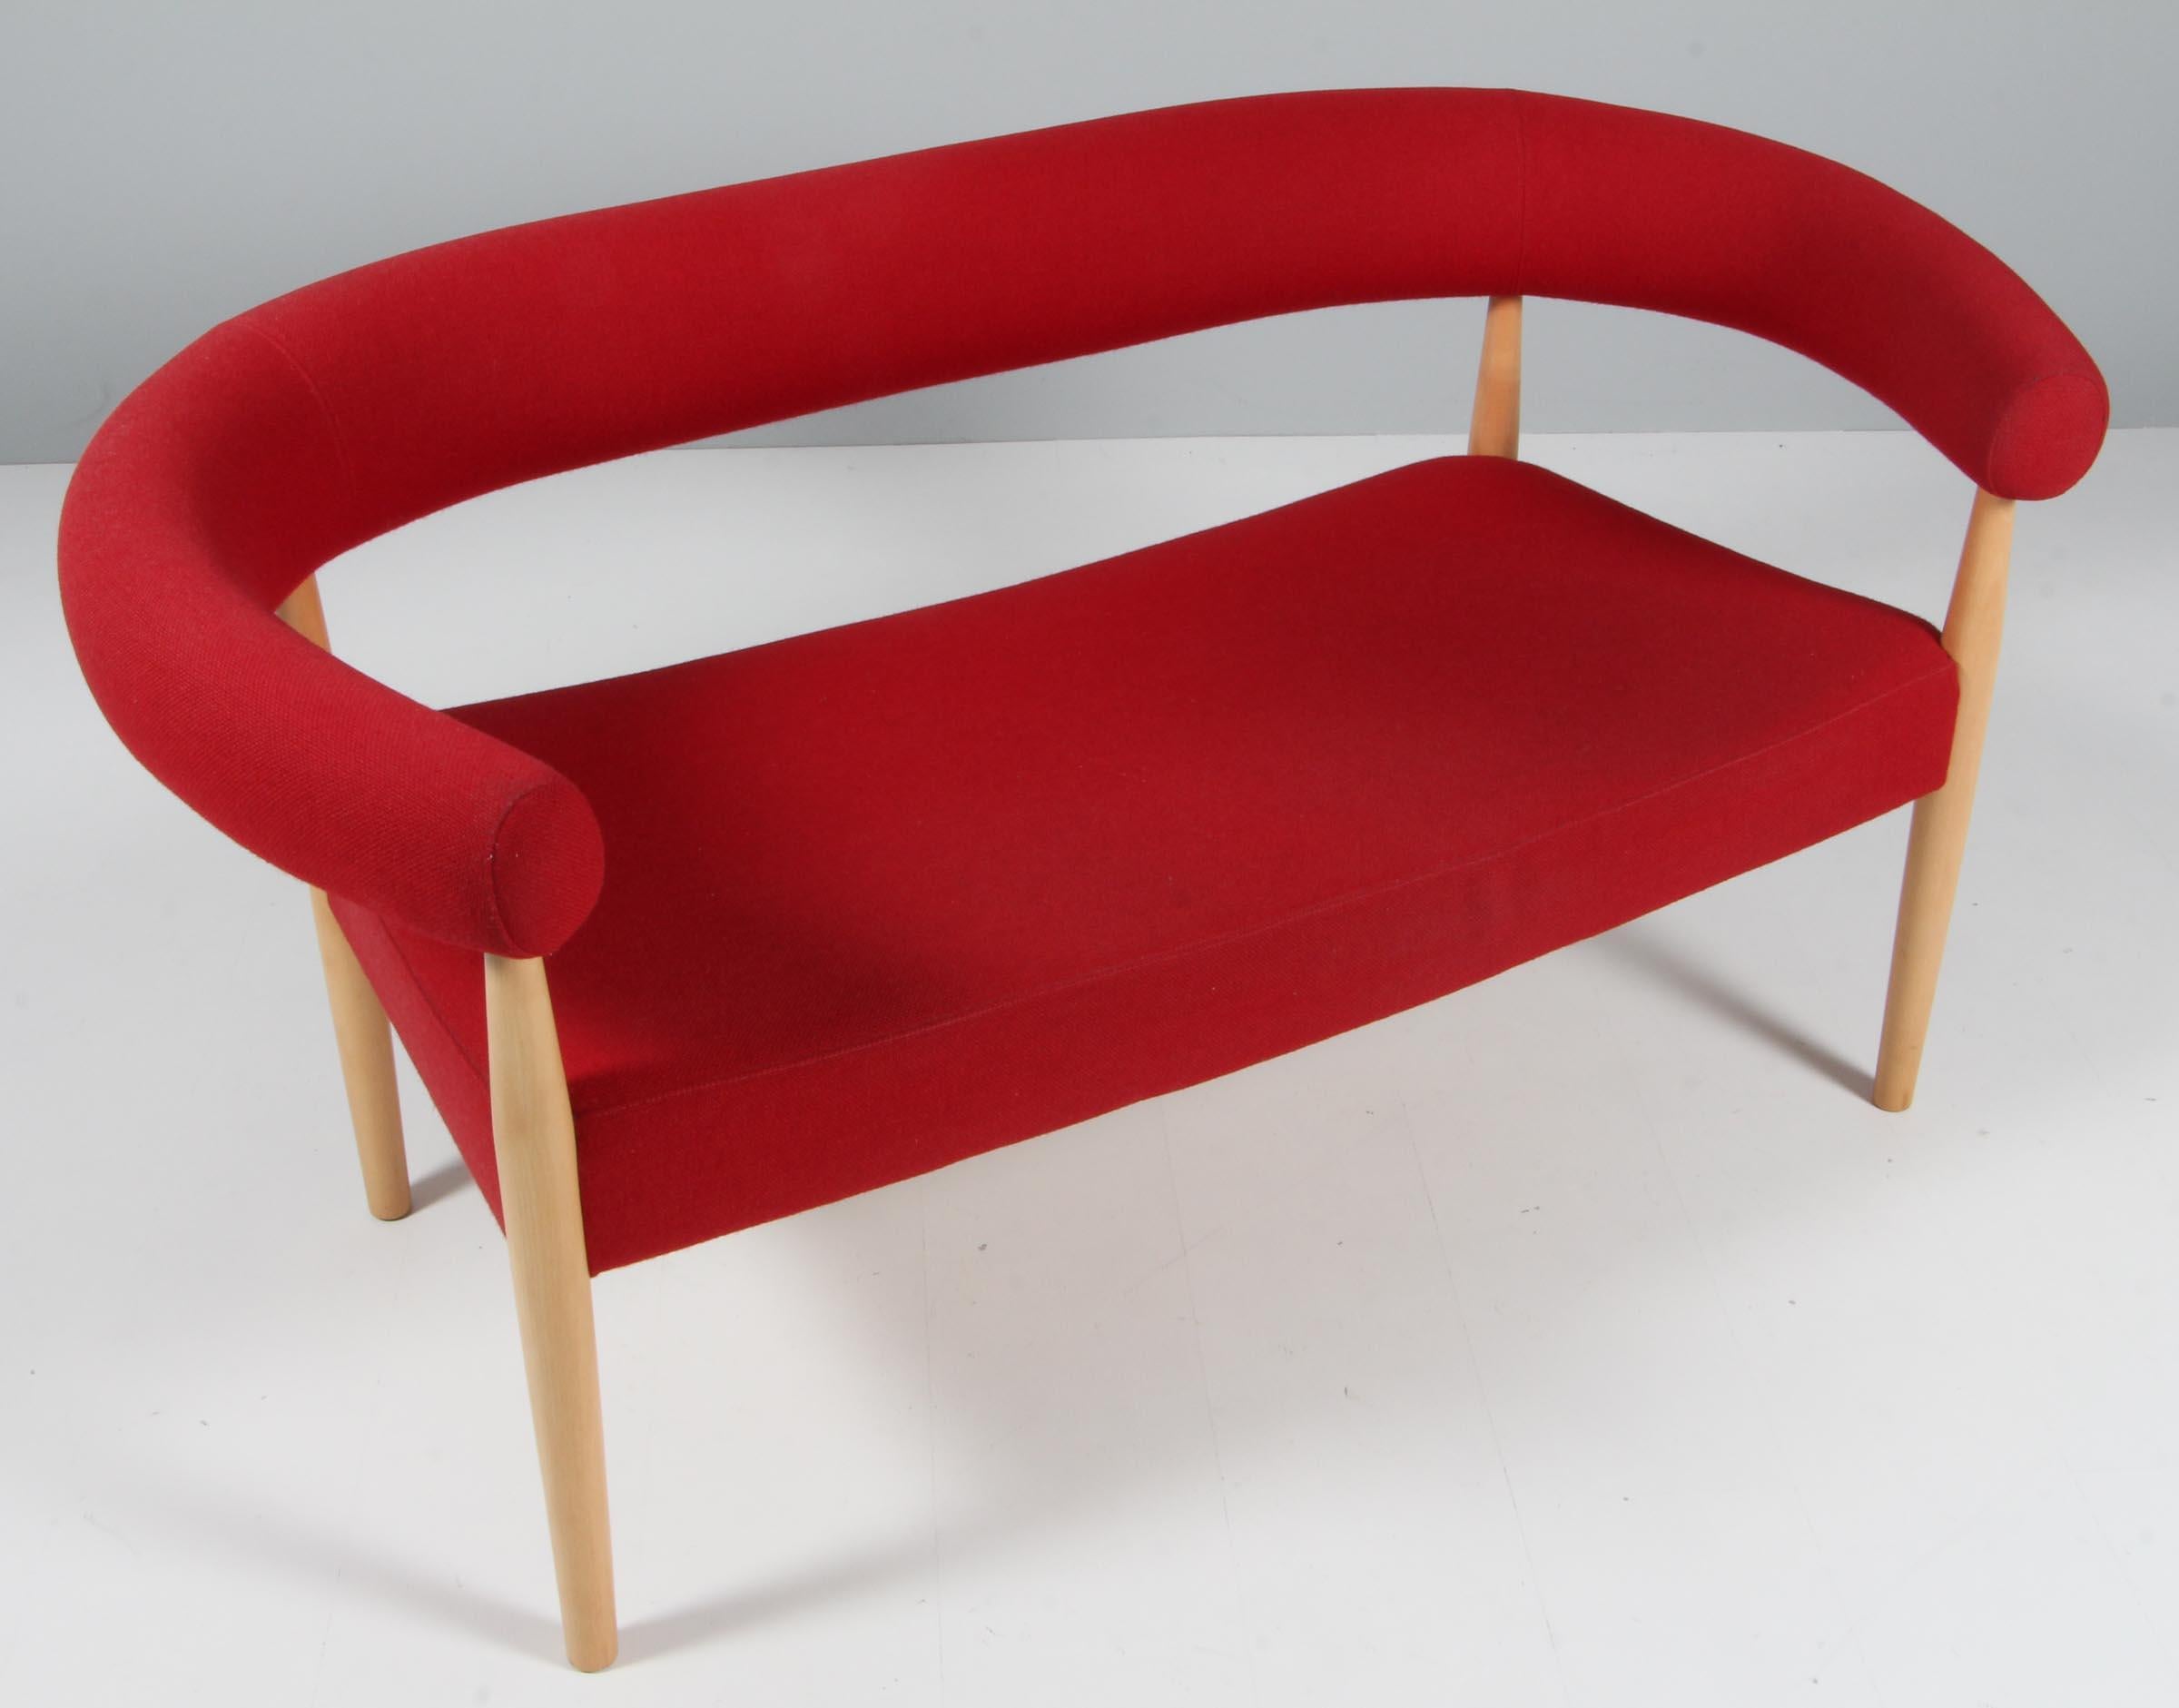 Nanna & Jørgen Ditzel two seat sofa with red tonus wool upholstery. Frame made of maple. 

Model 2612, made by Fredericia Furniture. Very rare model, normally only seen in lounge chair.